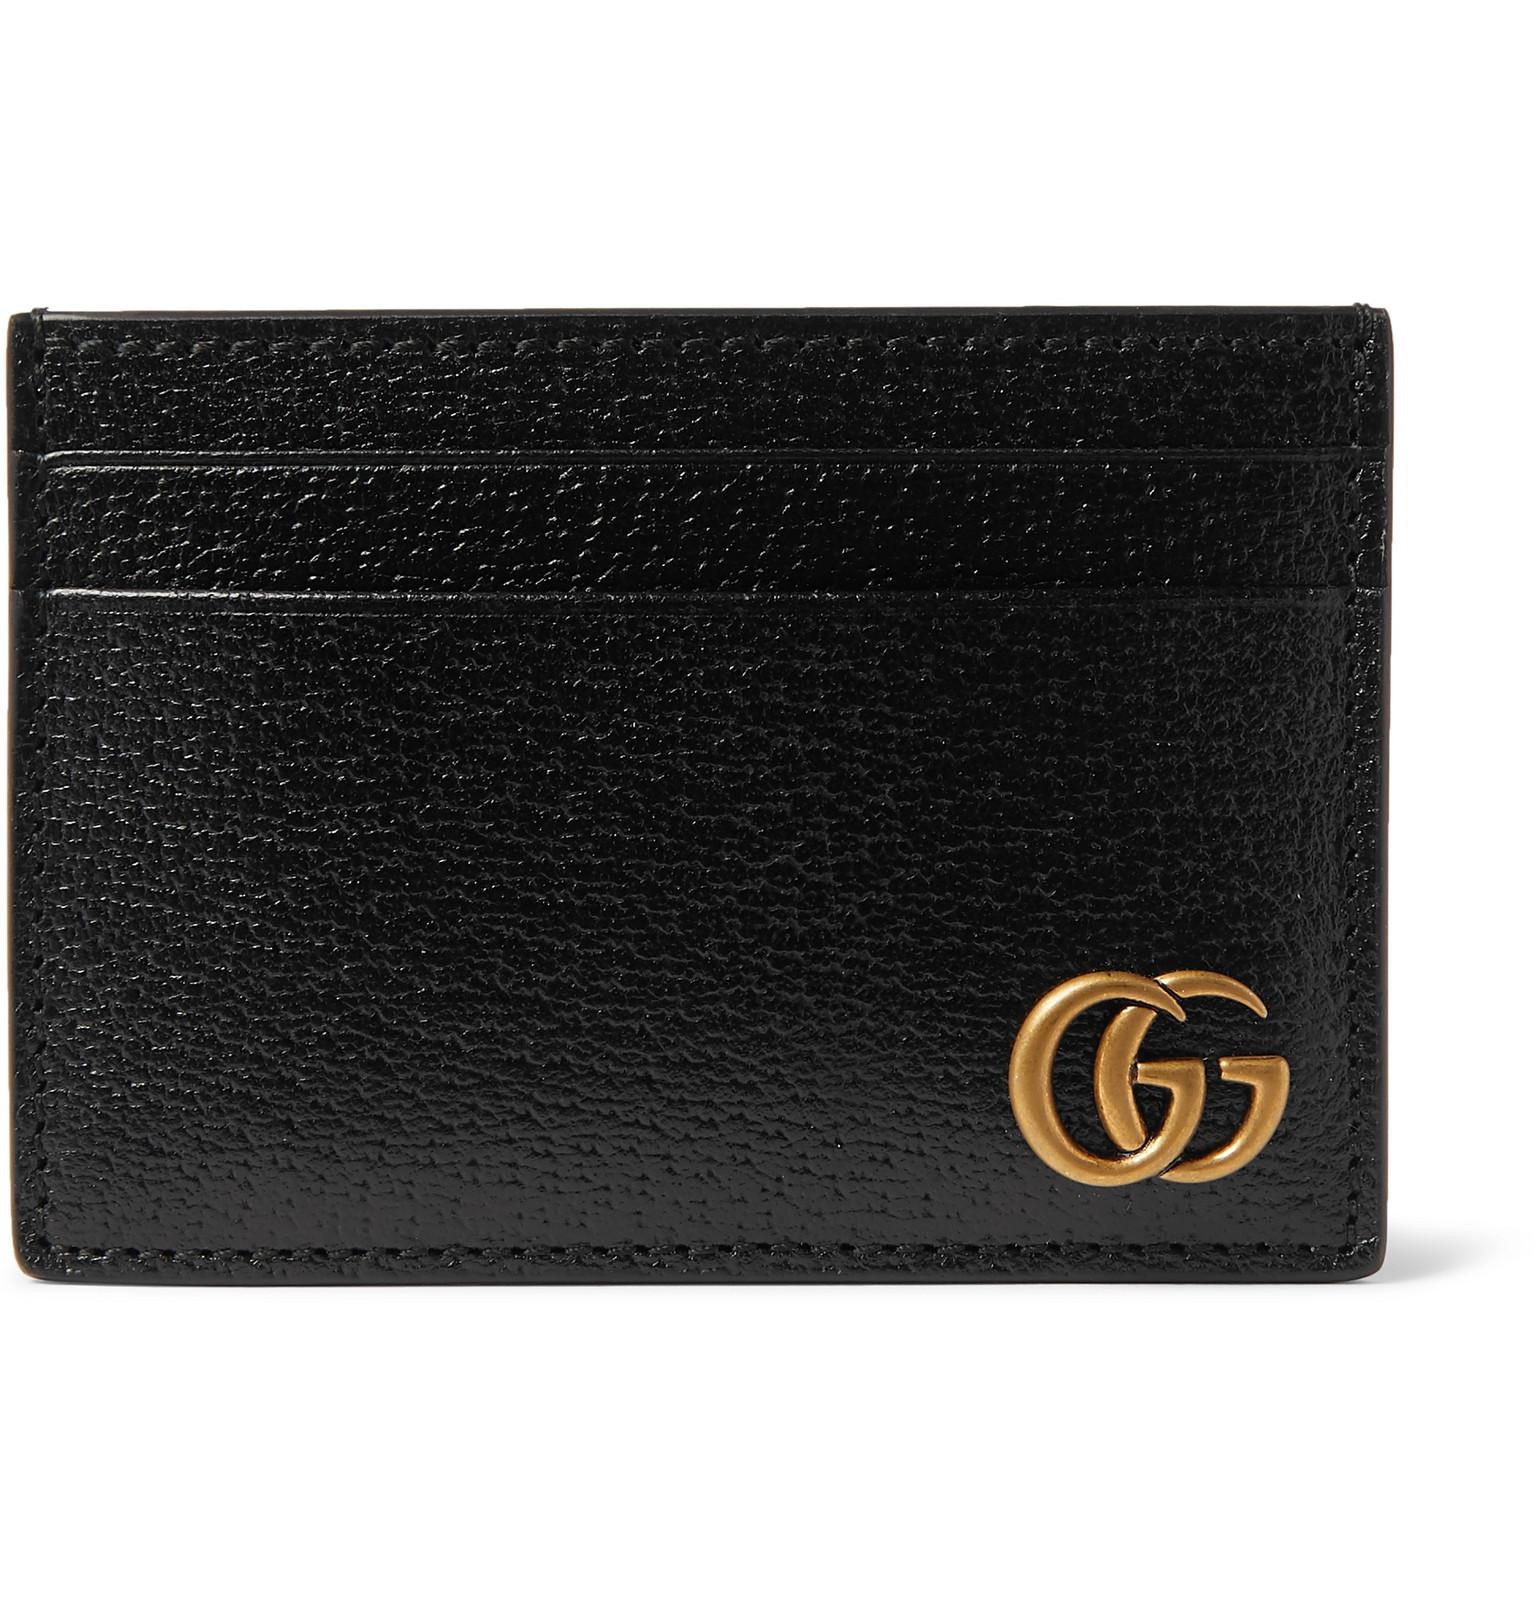 Full-Grain Leather Cardholder with Money Clip